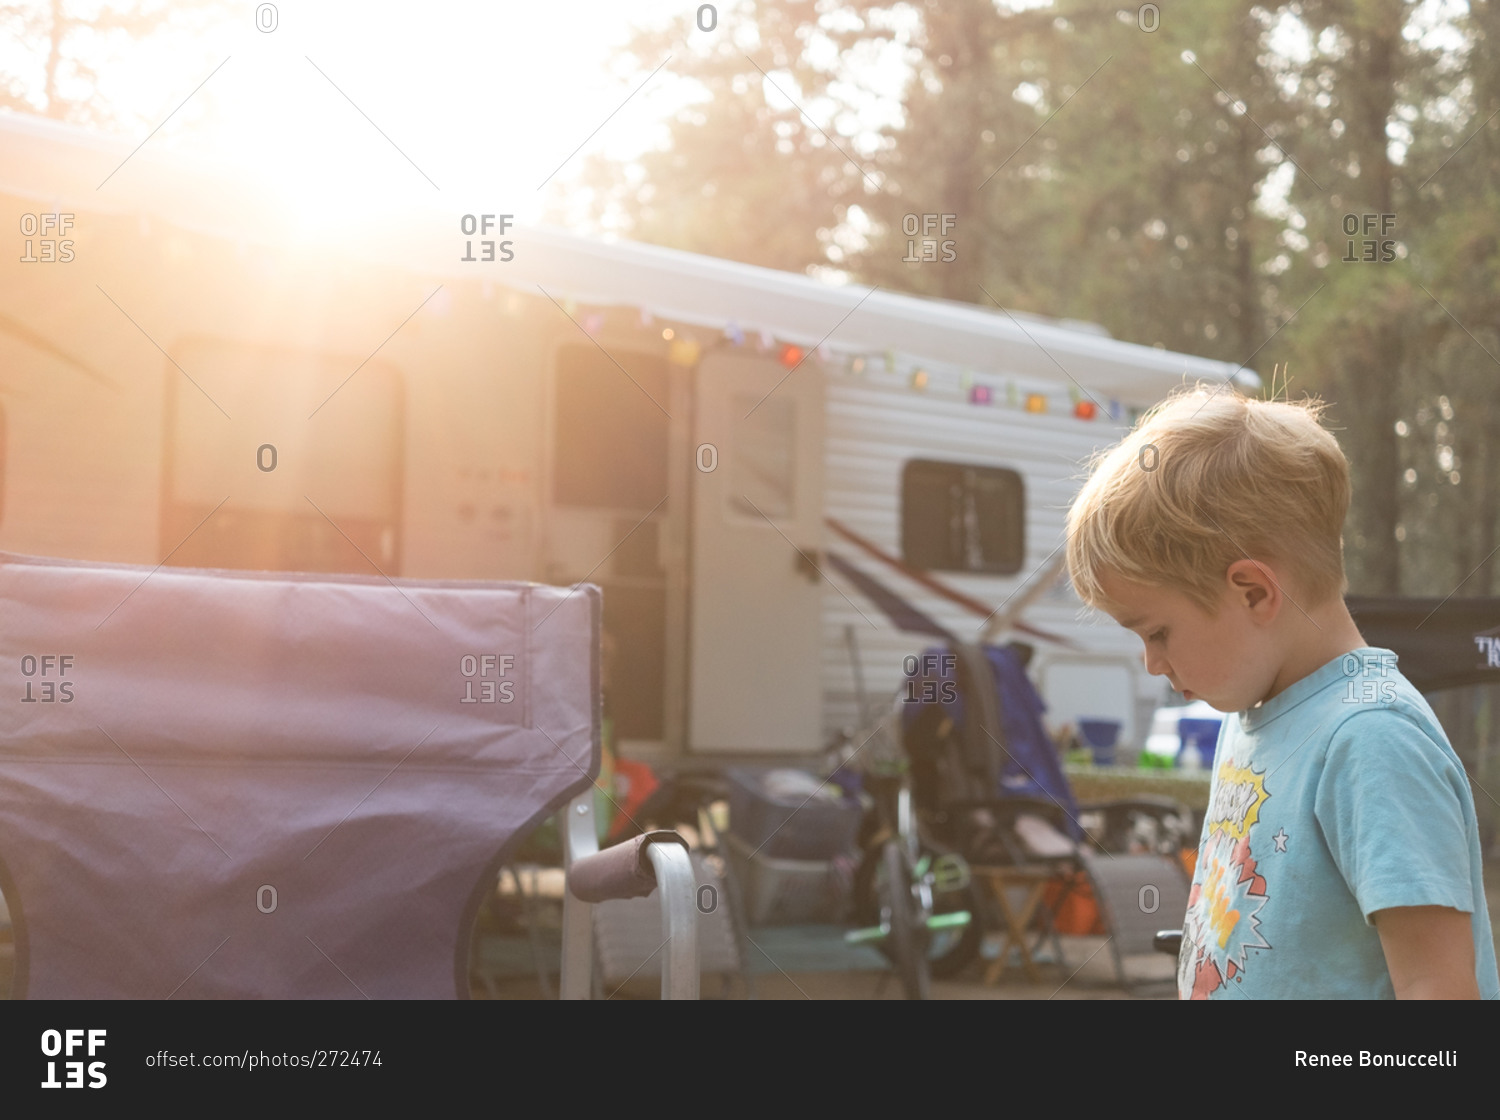 Young boy at campsite next to trailer